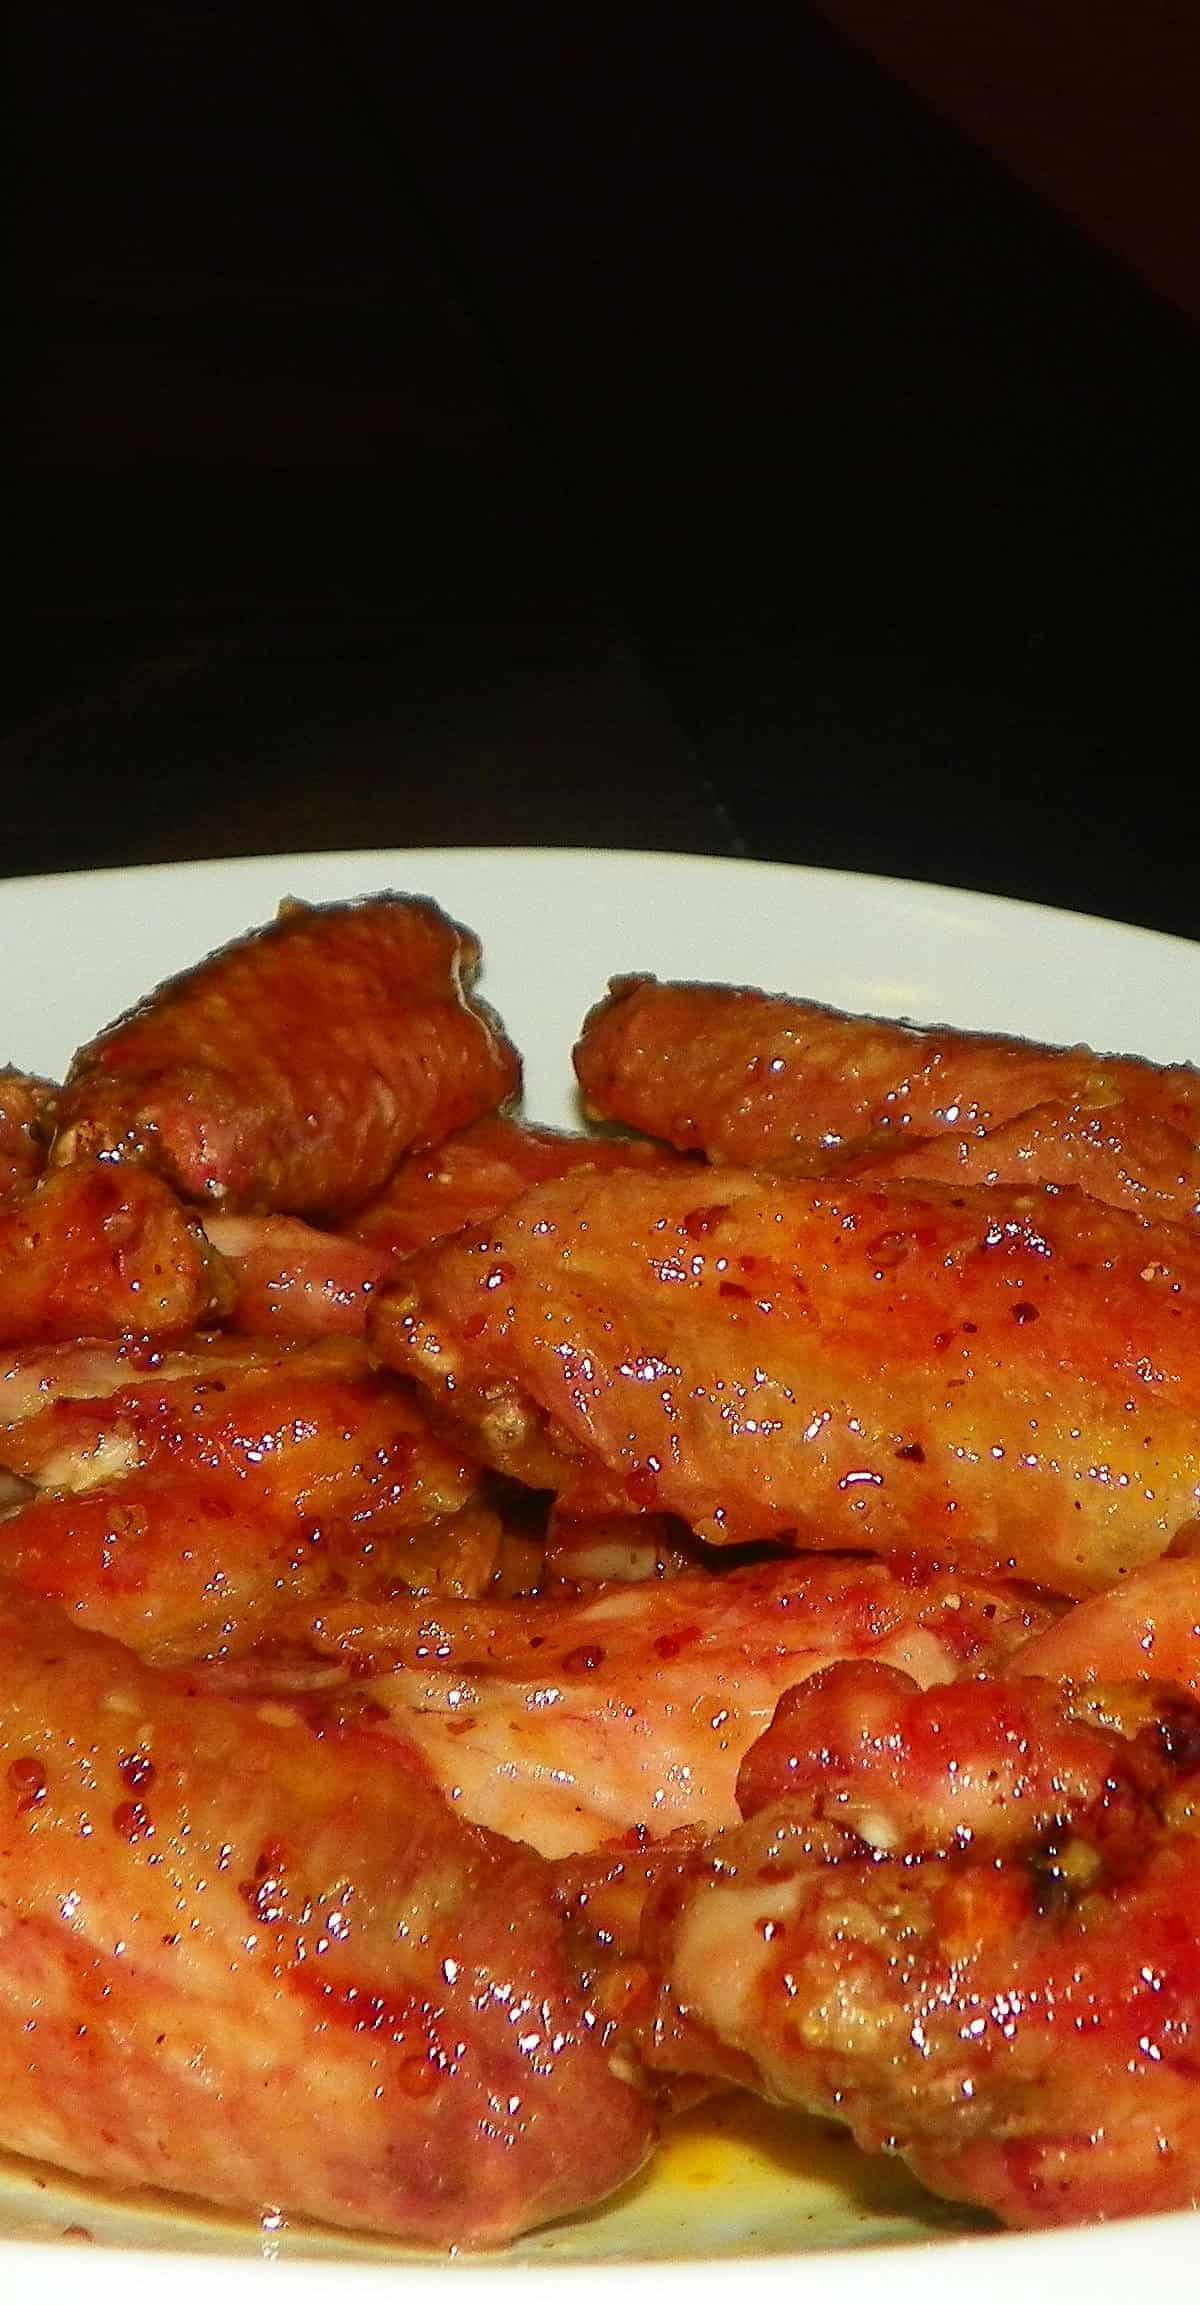  These chicken wings will take your taste buds to new heights!